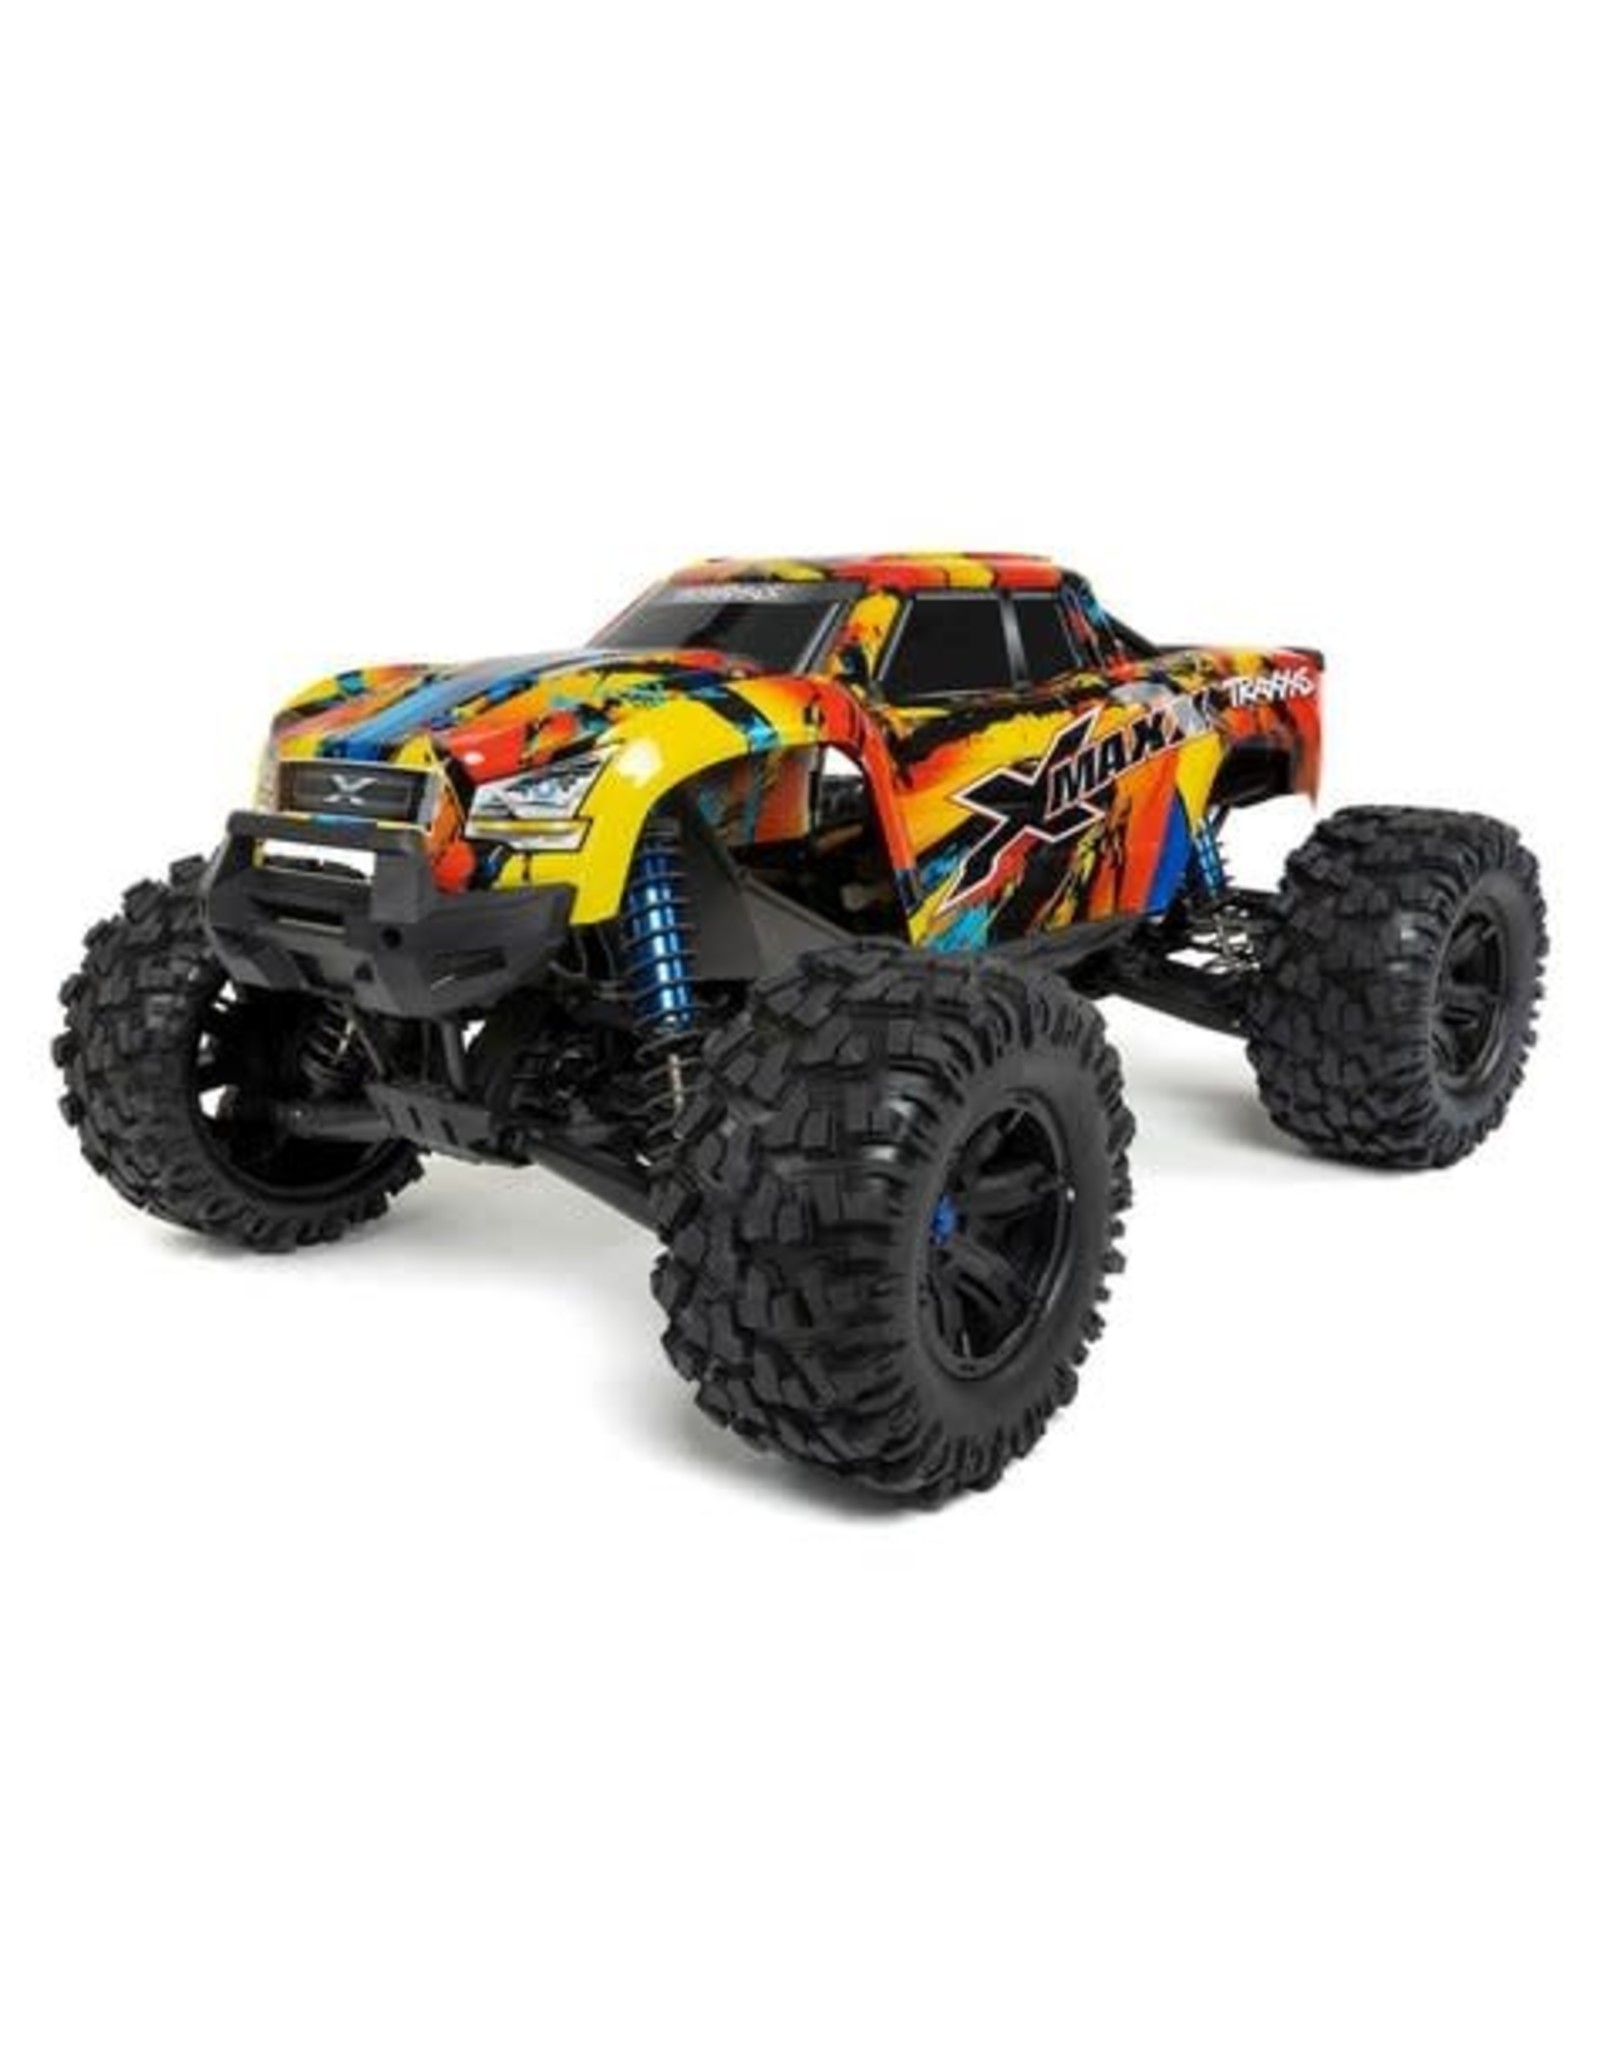 Traxxas Traxxas XMAXX  Fully assembled and Ready-To-Race® with TQi™ 2.4GHz radio system with Traxxas Stability Management, VXL-8s Brushless Power System, and ProGraphix® painted body.